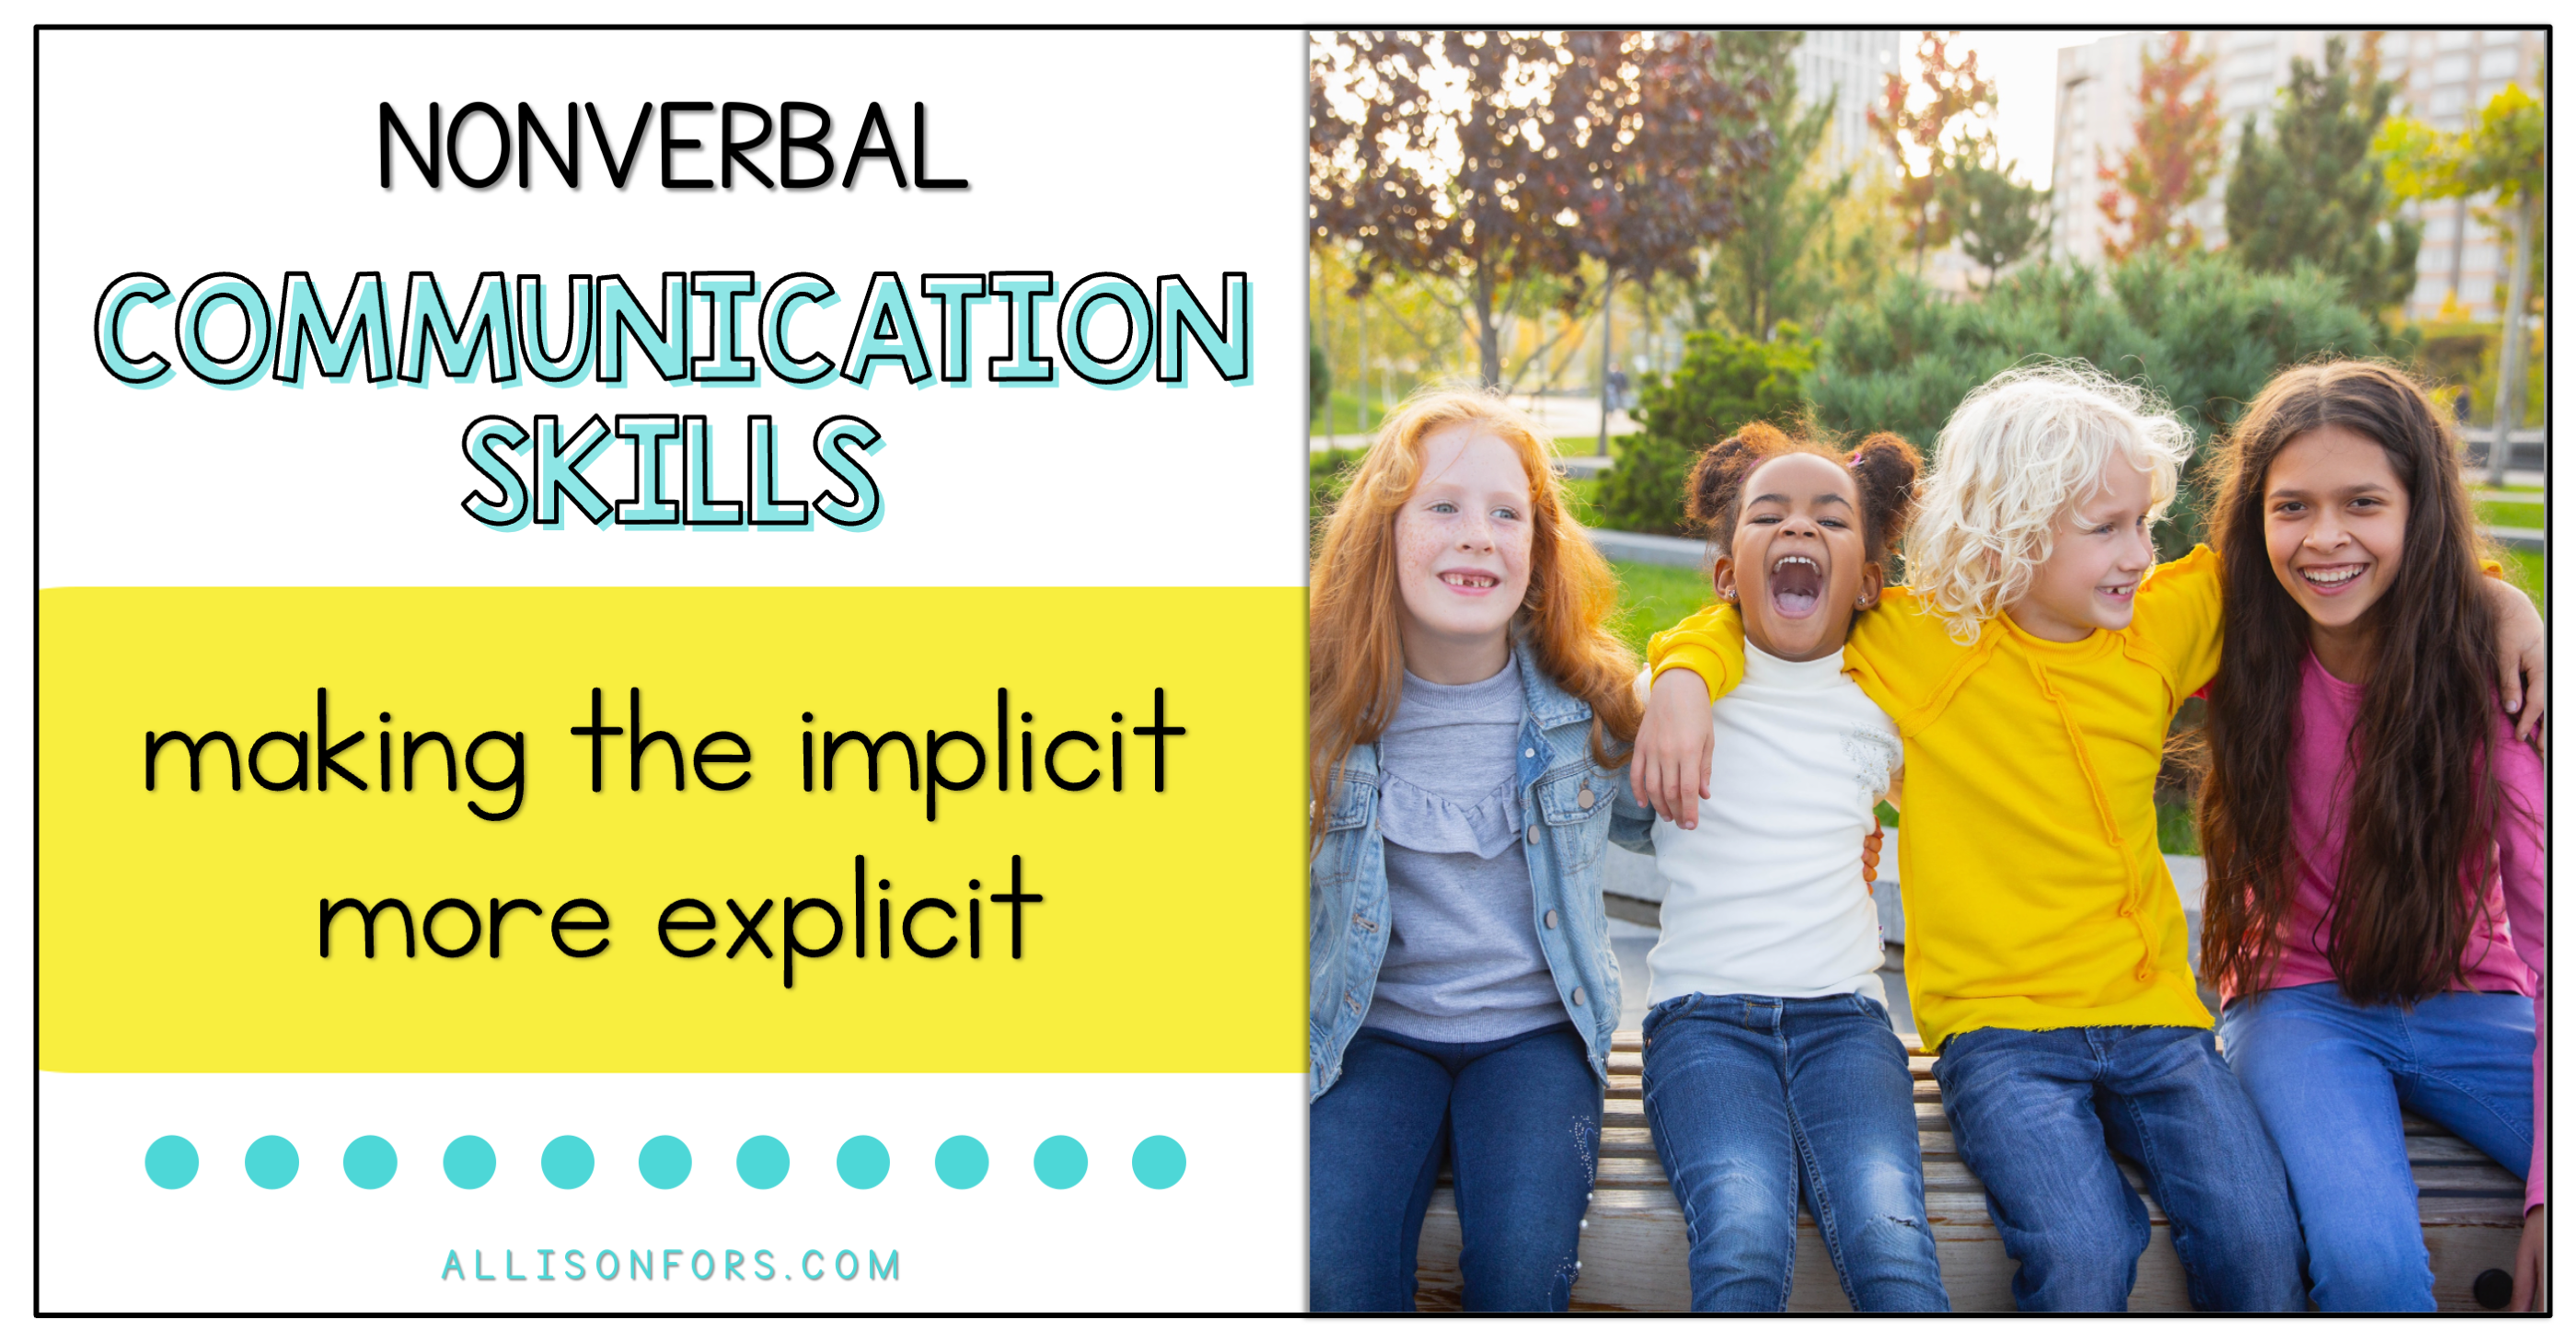 Nonverbal Communication Skills: Making The Implicit More Explicit